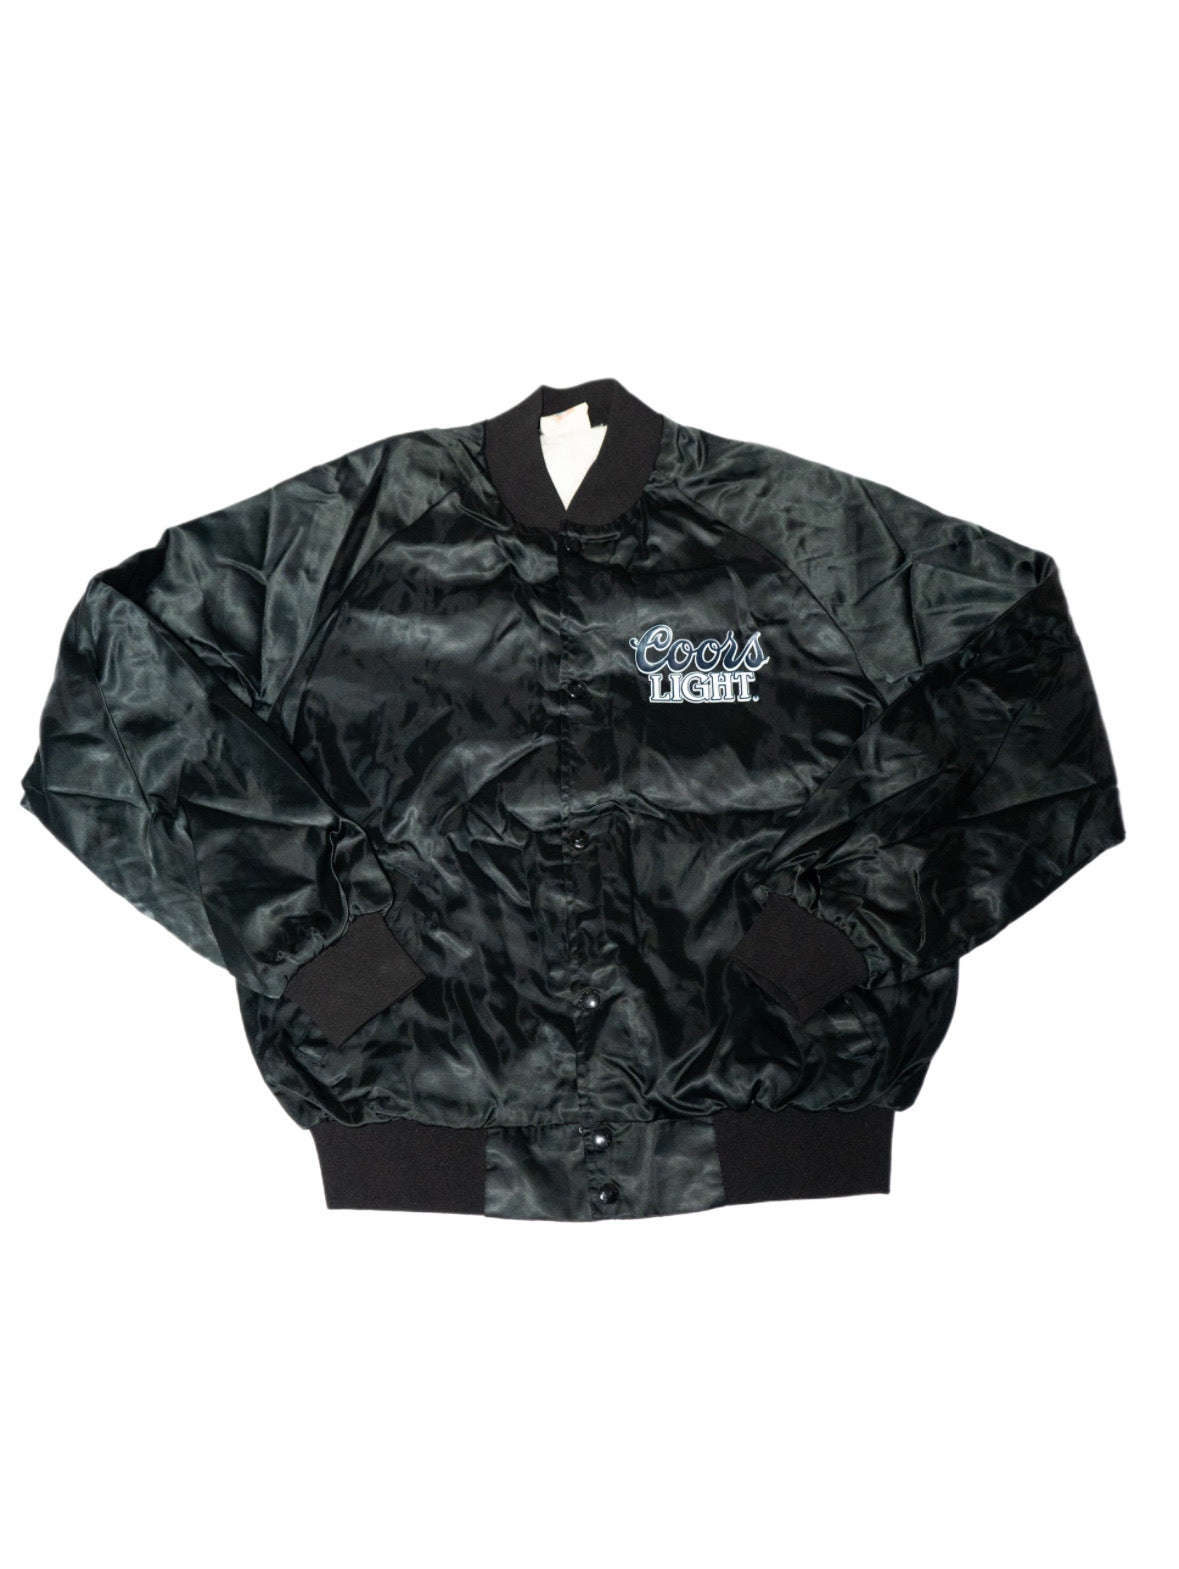 TheSilverBullet College Jacke